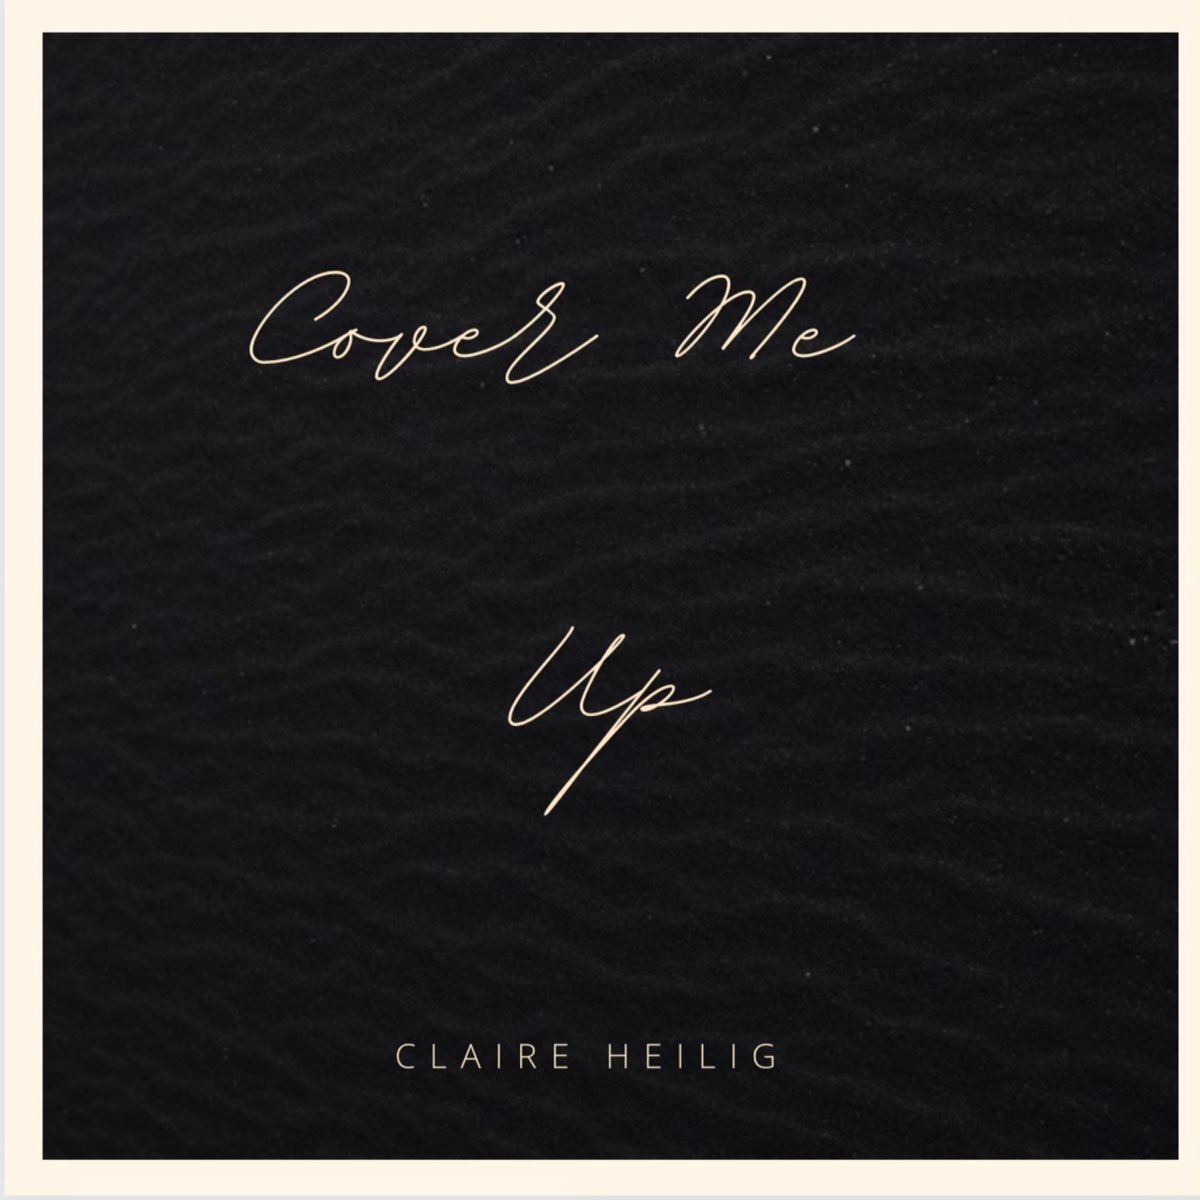 ‎Cover Me Up - Single by Claire Heilig on Apple Music